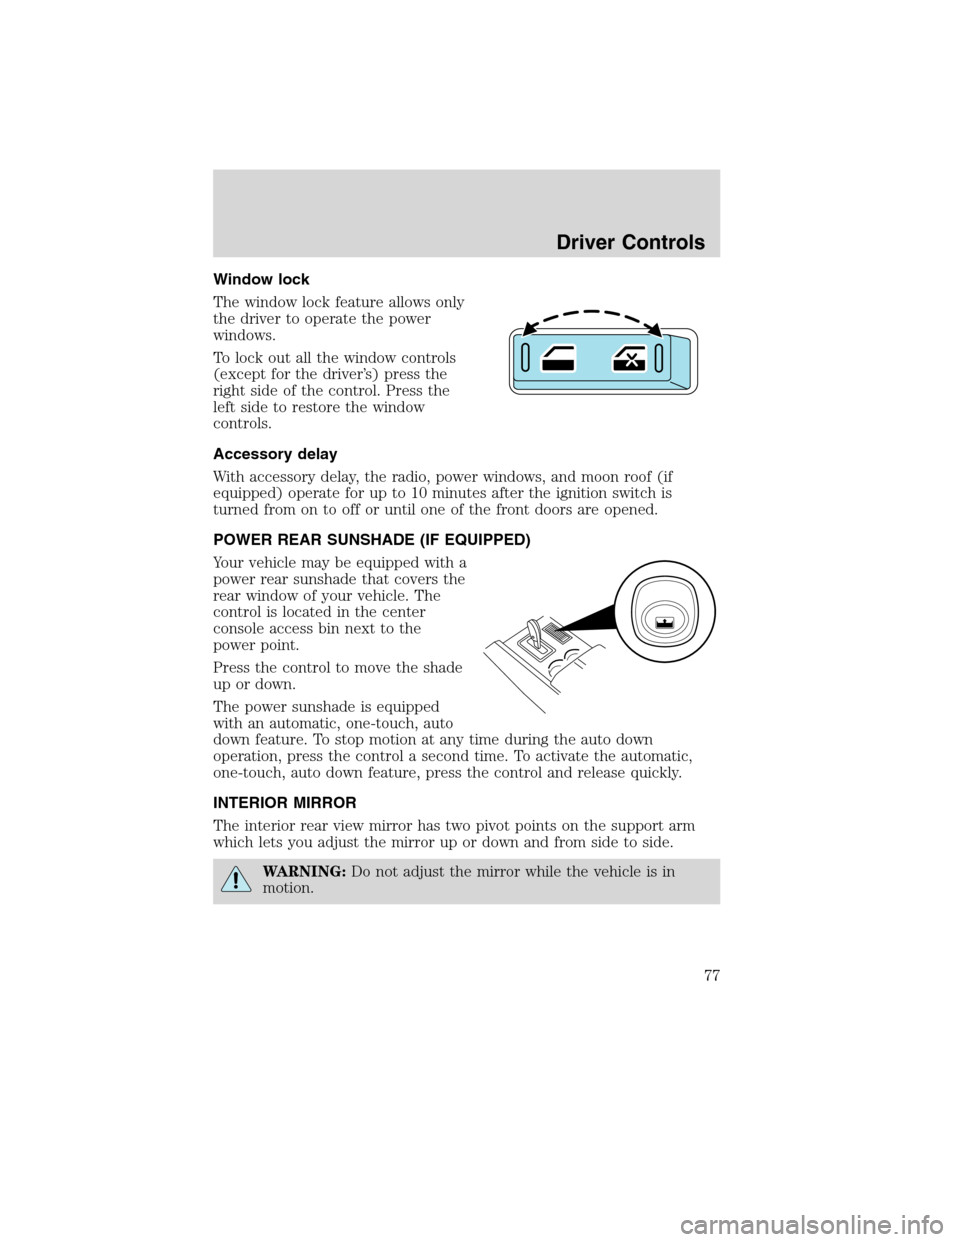 LINCOLN MKS 2010  Owners Manual Window lock
The window lock feature allows only
the driver to operate the power
windows.
To lock out all the window controls
(except for the driver’s) press the
right side of the control. Press the
